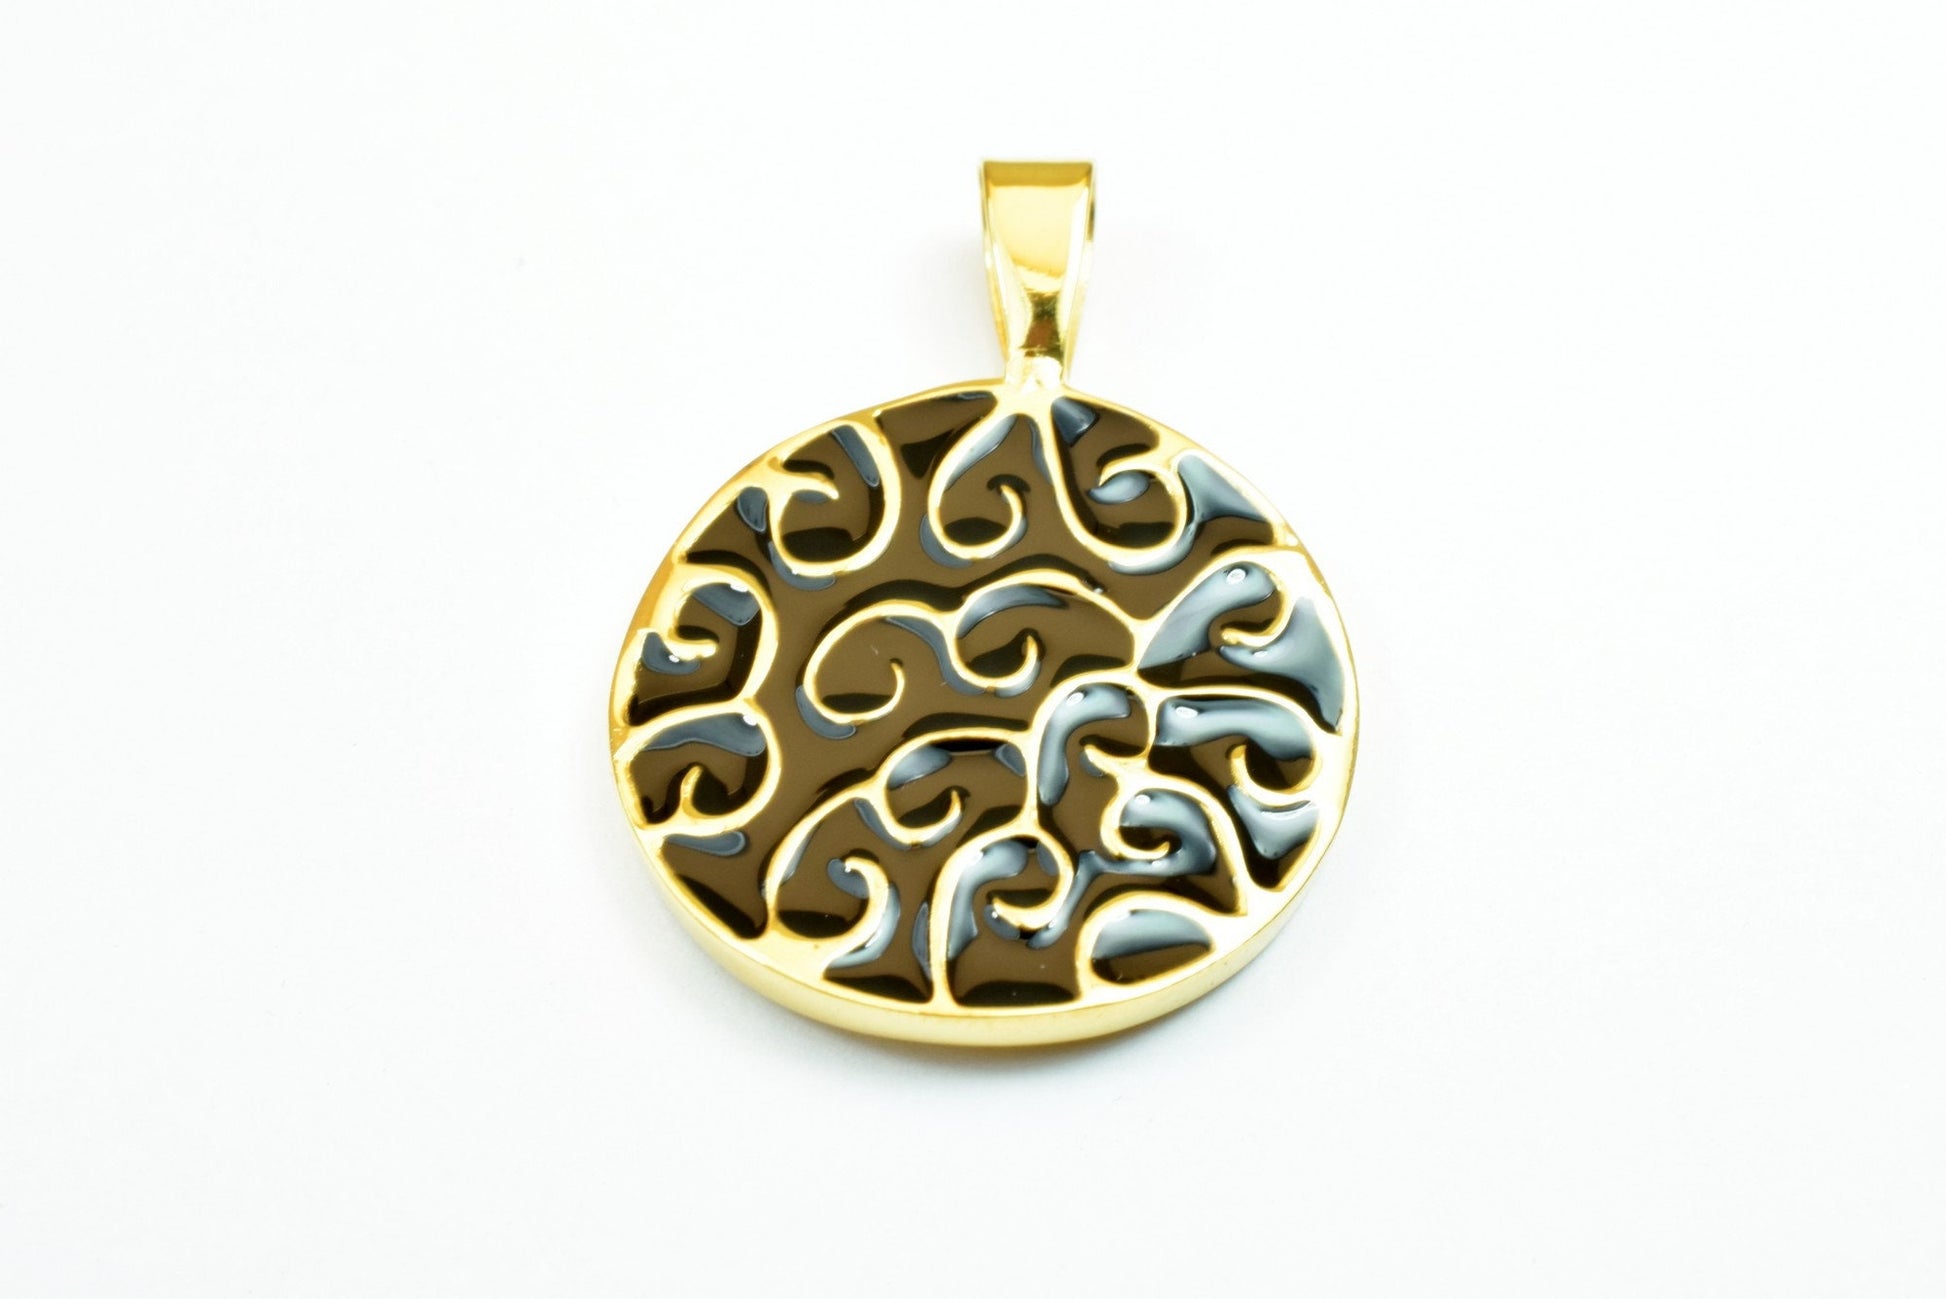 18K as Gold Filled* Black Irish Celtic Stainless Steel Pendant OR White as Gold Filled* Charm Size 36x26mm For Jewelry Making